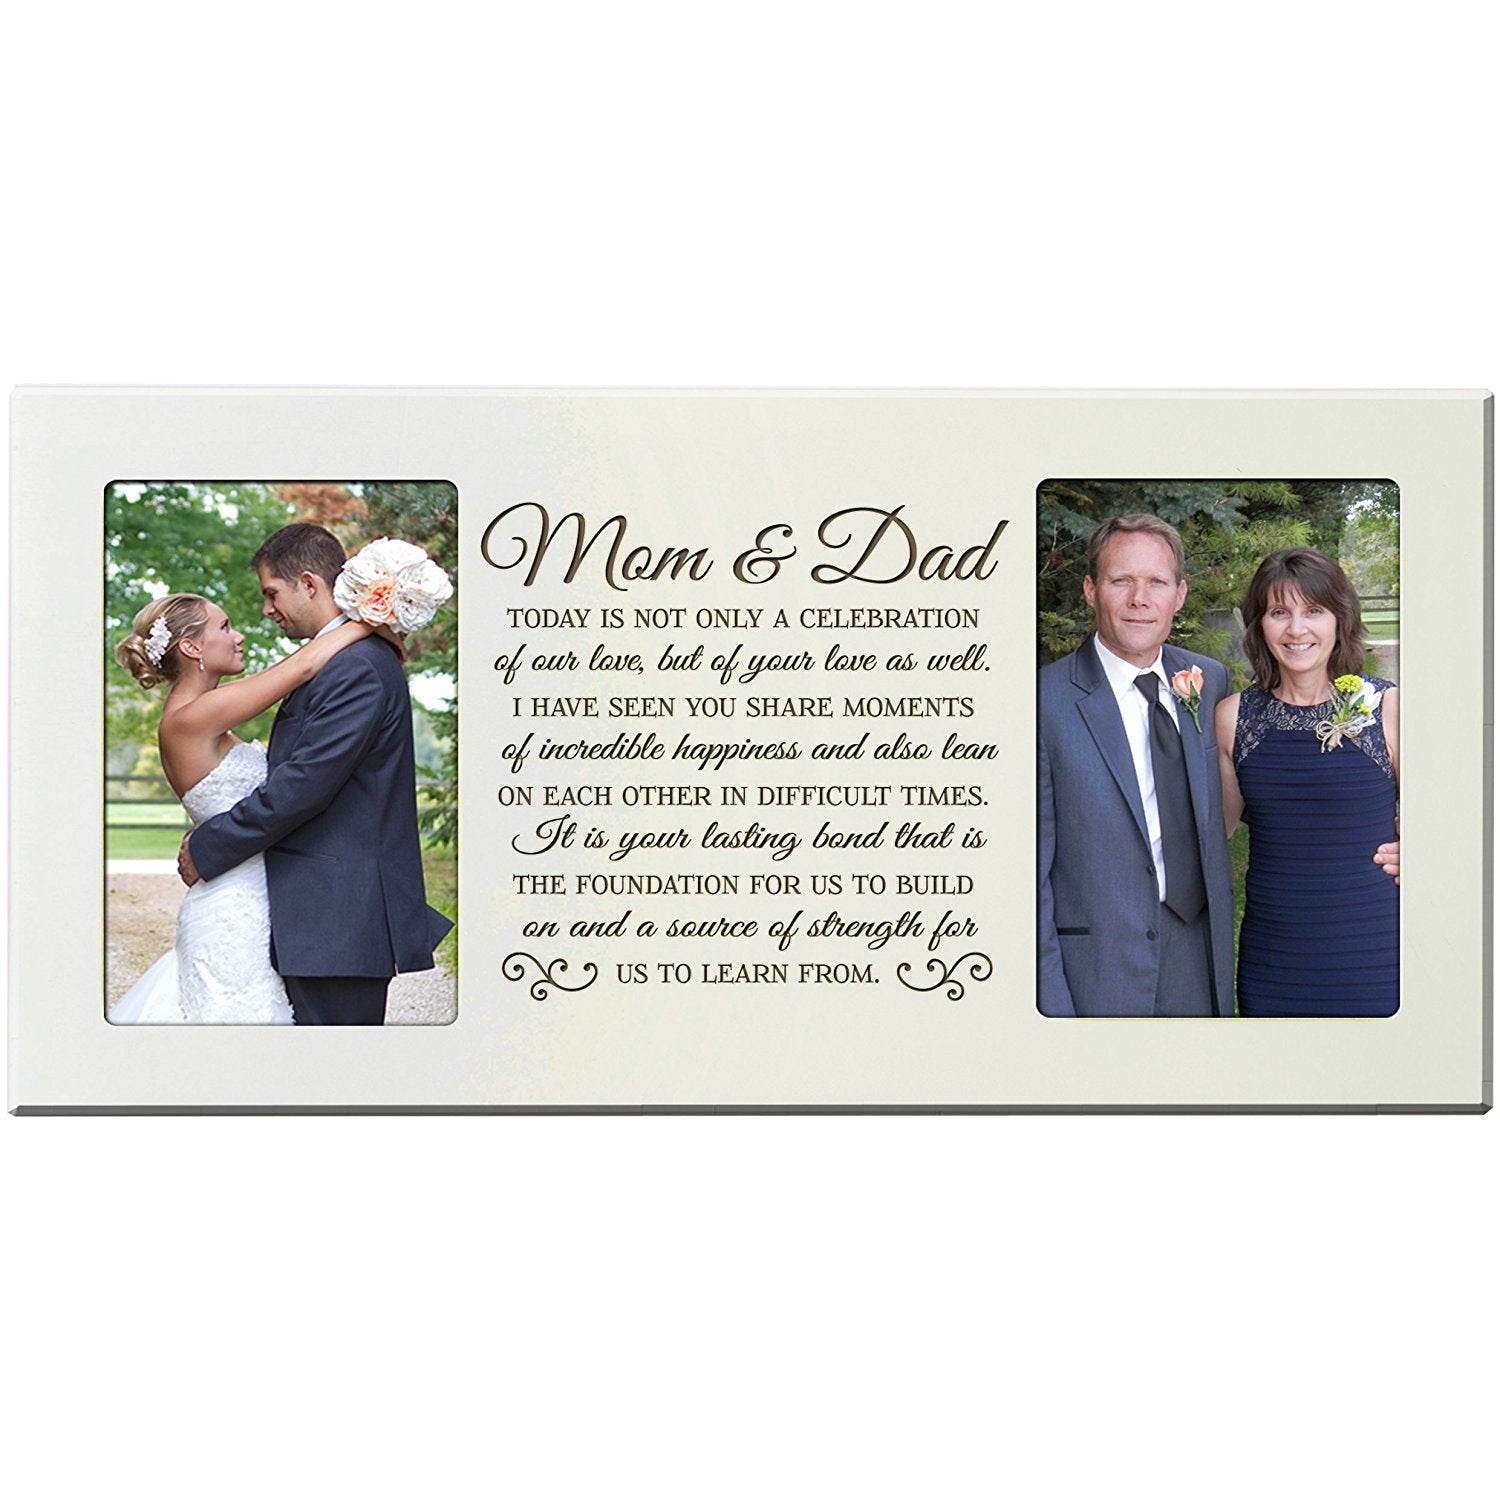 Personalized Parent Wedding Photo Picture Frame Gift Idea "Mom & Dad" - LifeSong Milestones